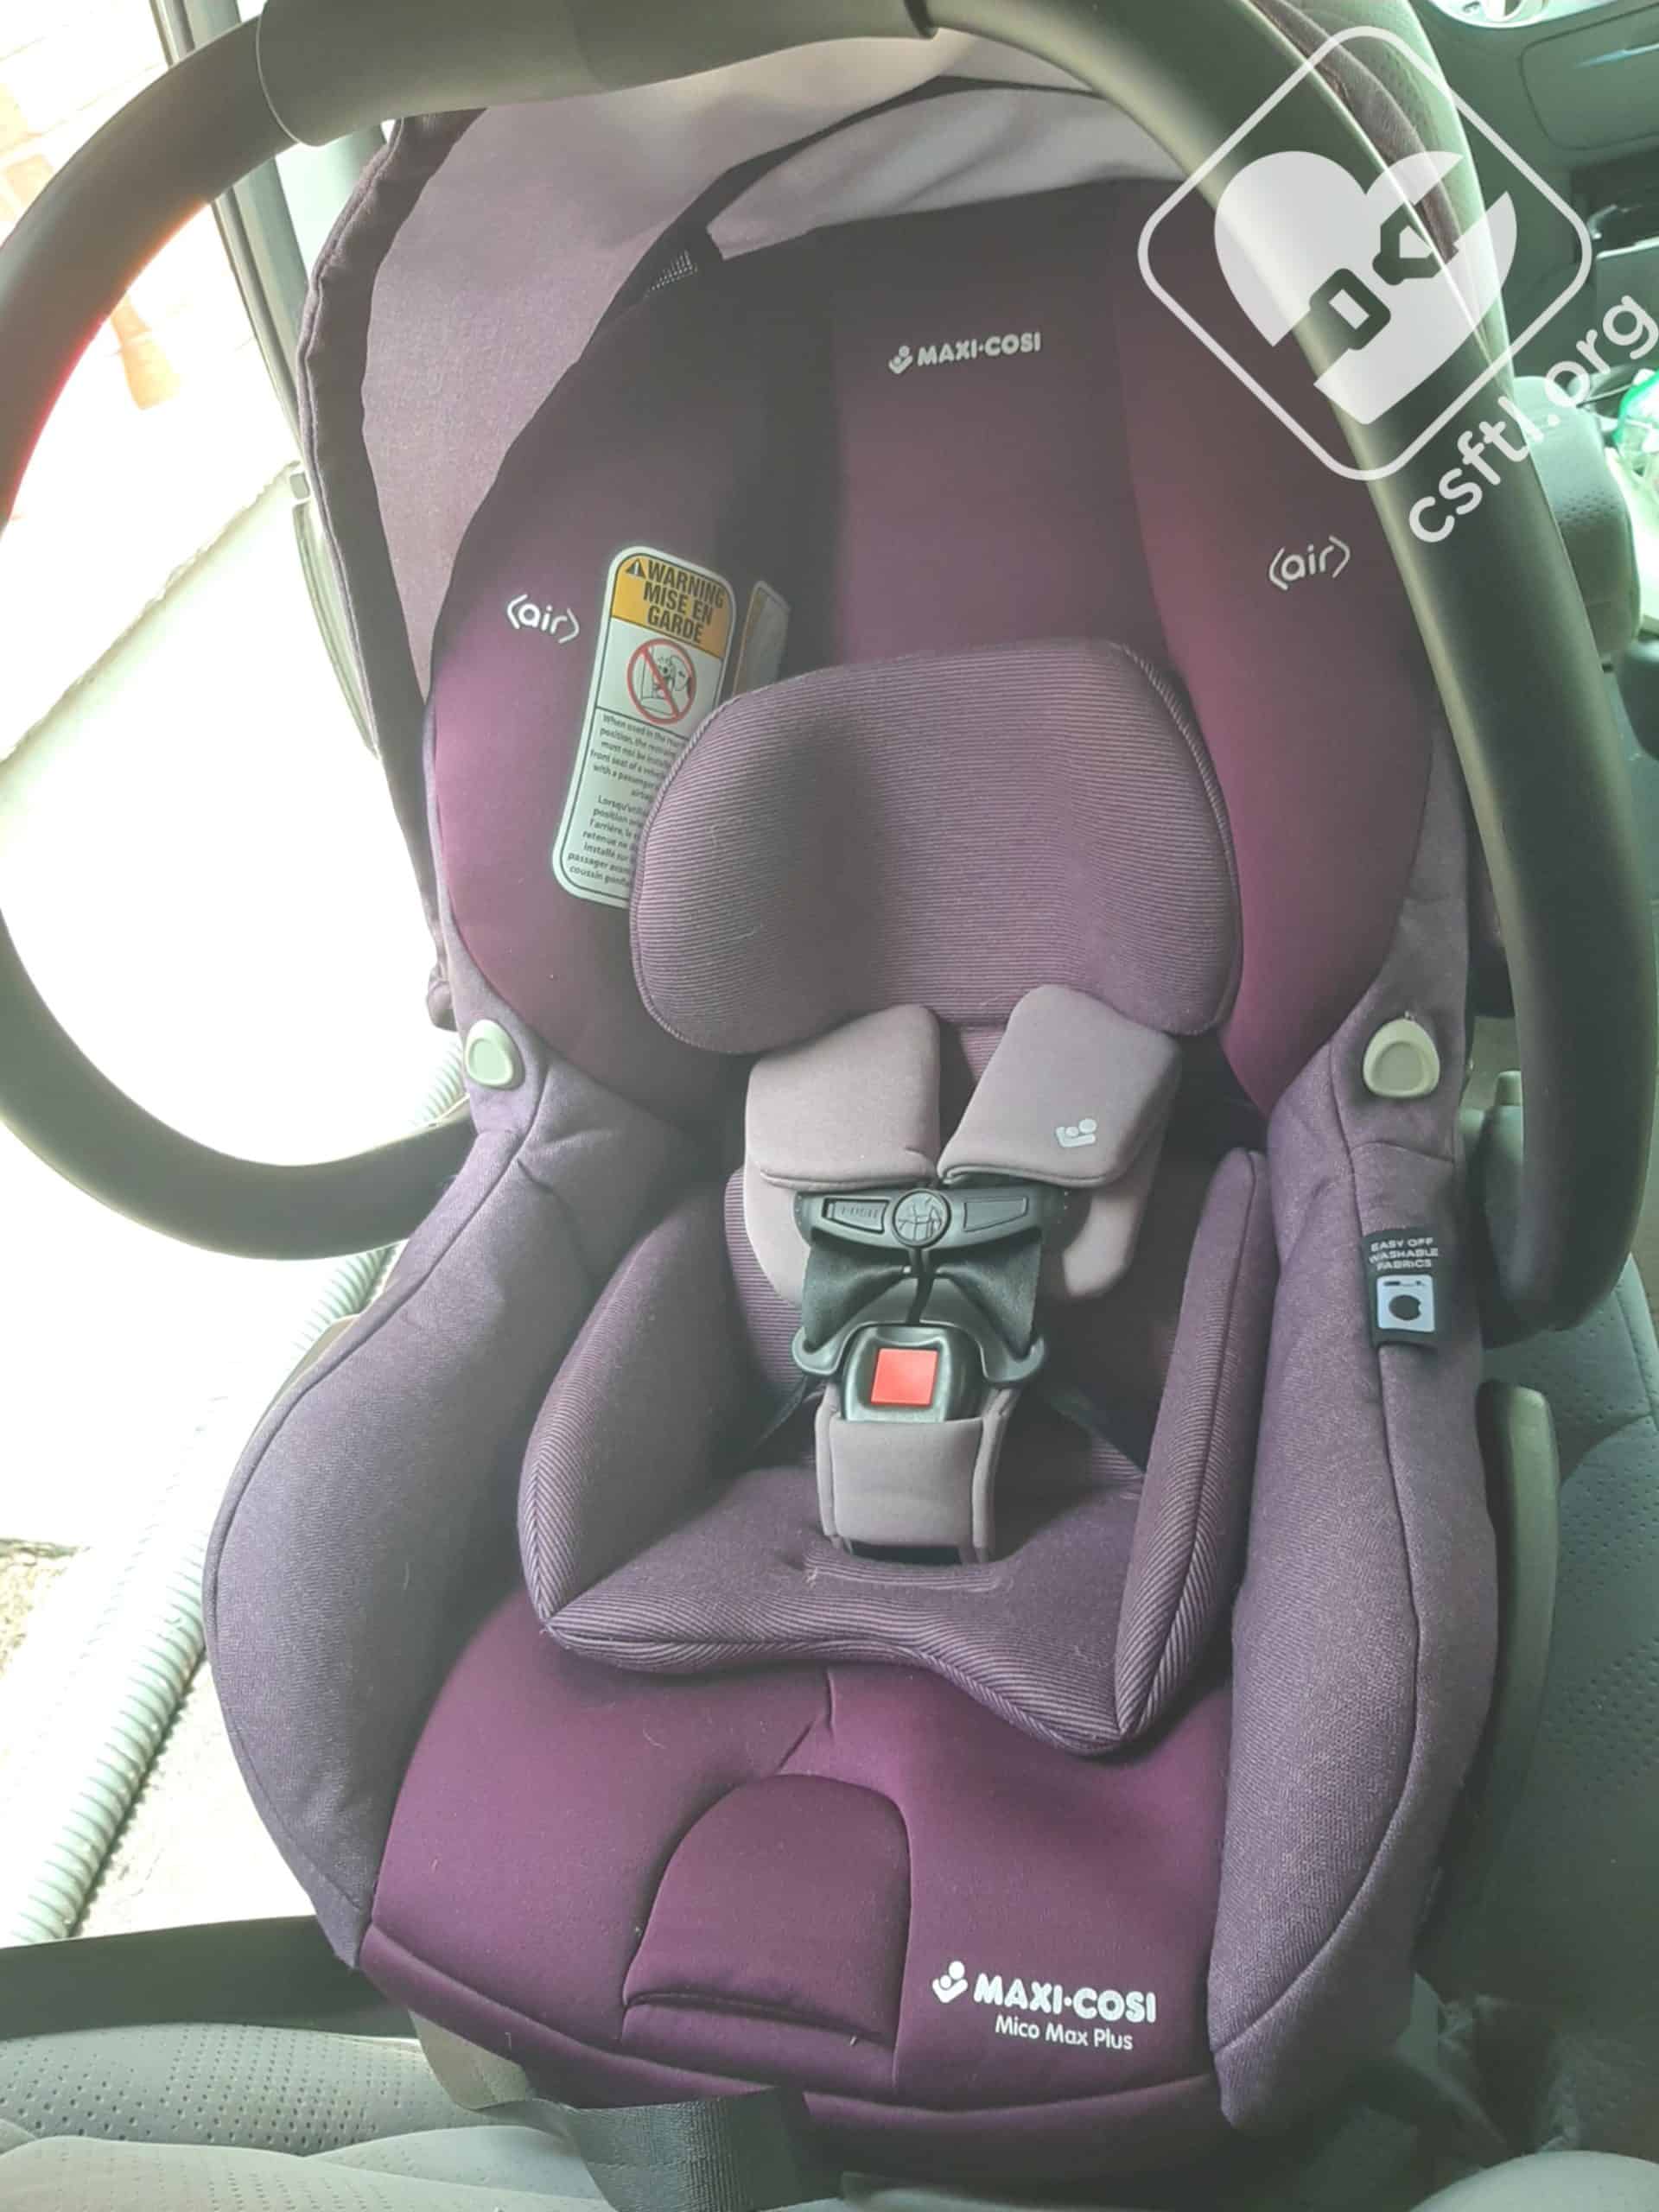 Maxi Cosi Mico Max Plus Review Car Seats For The Littles - Maxi Cosi Mico 30 Car Seat Weight Limit